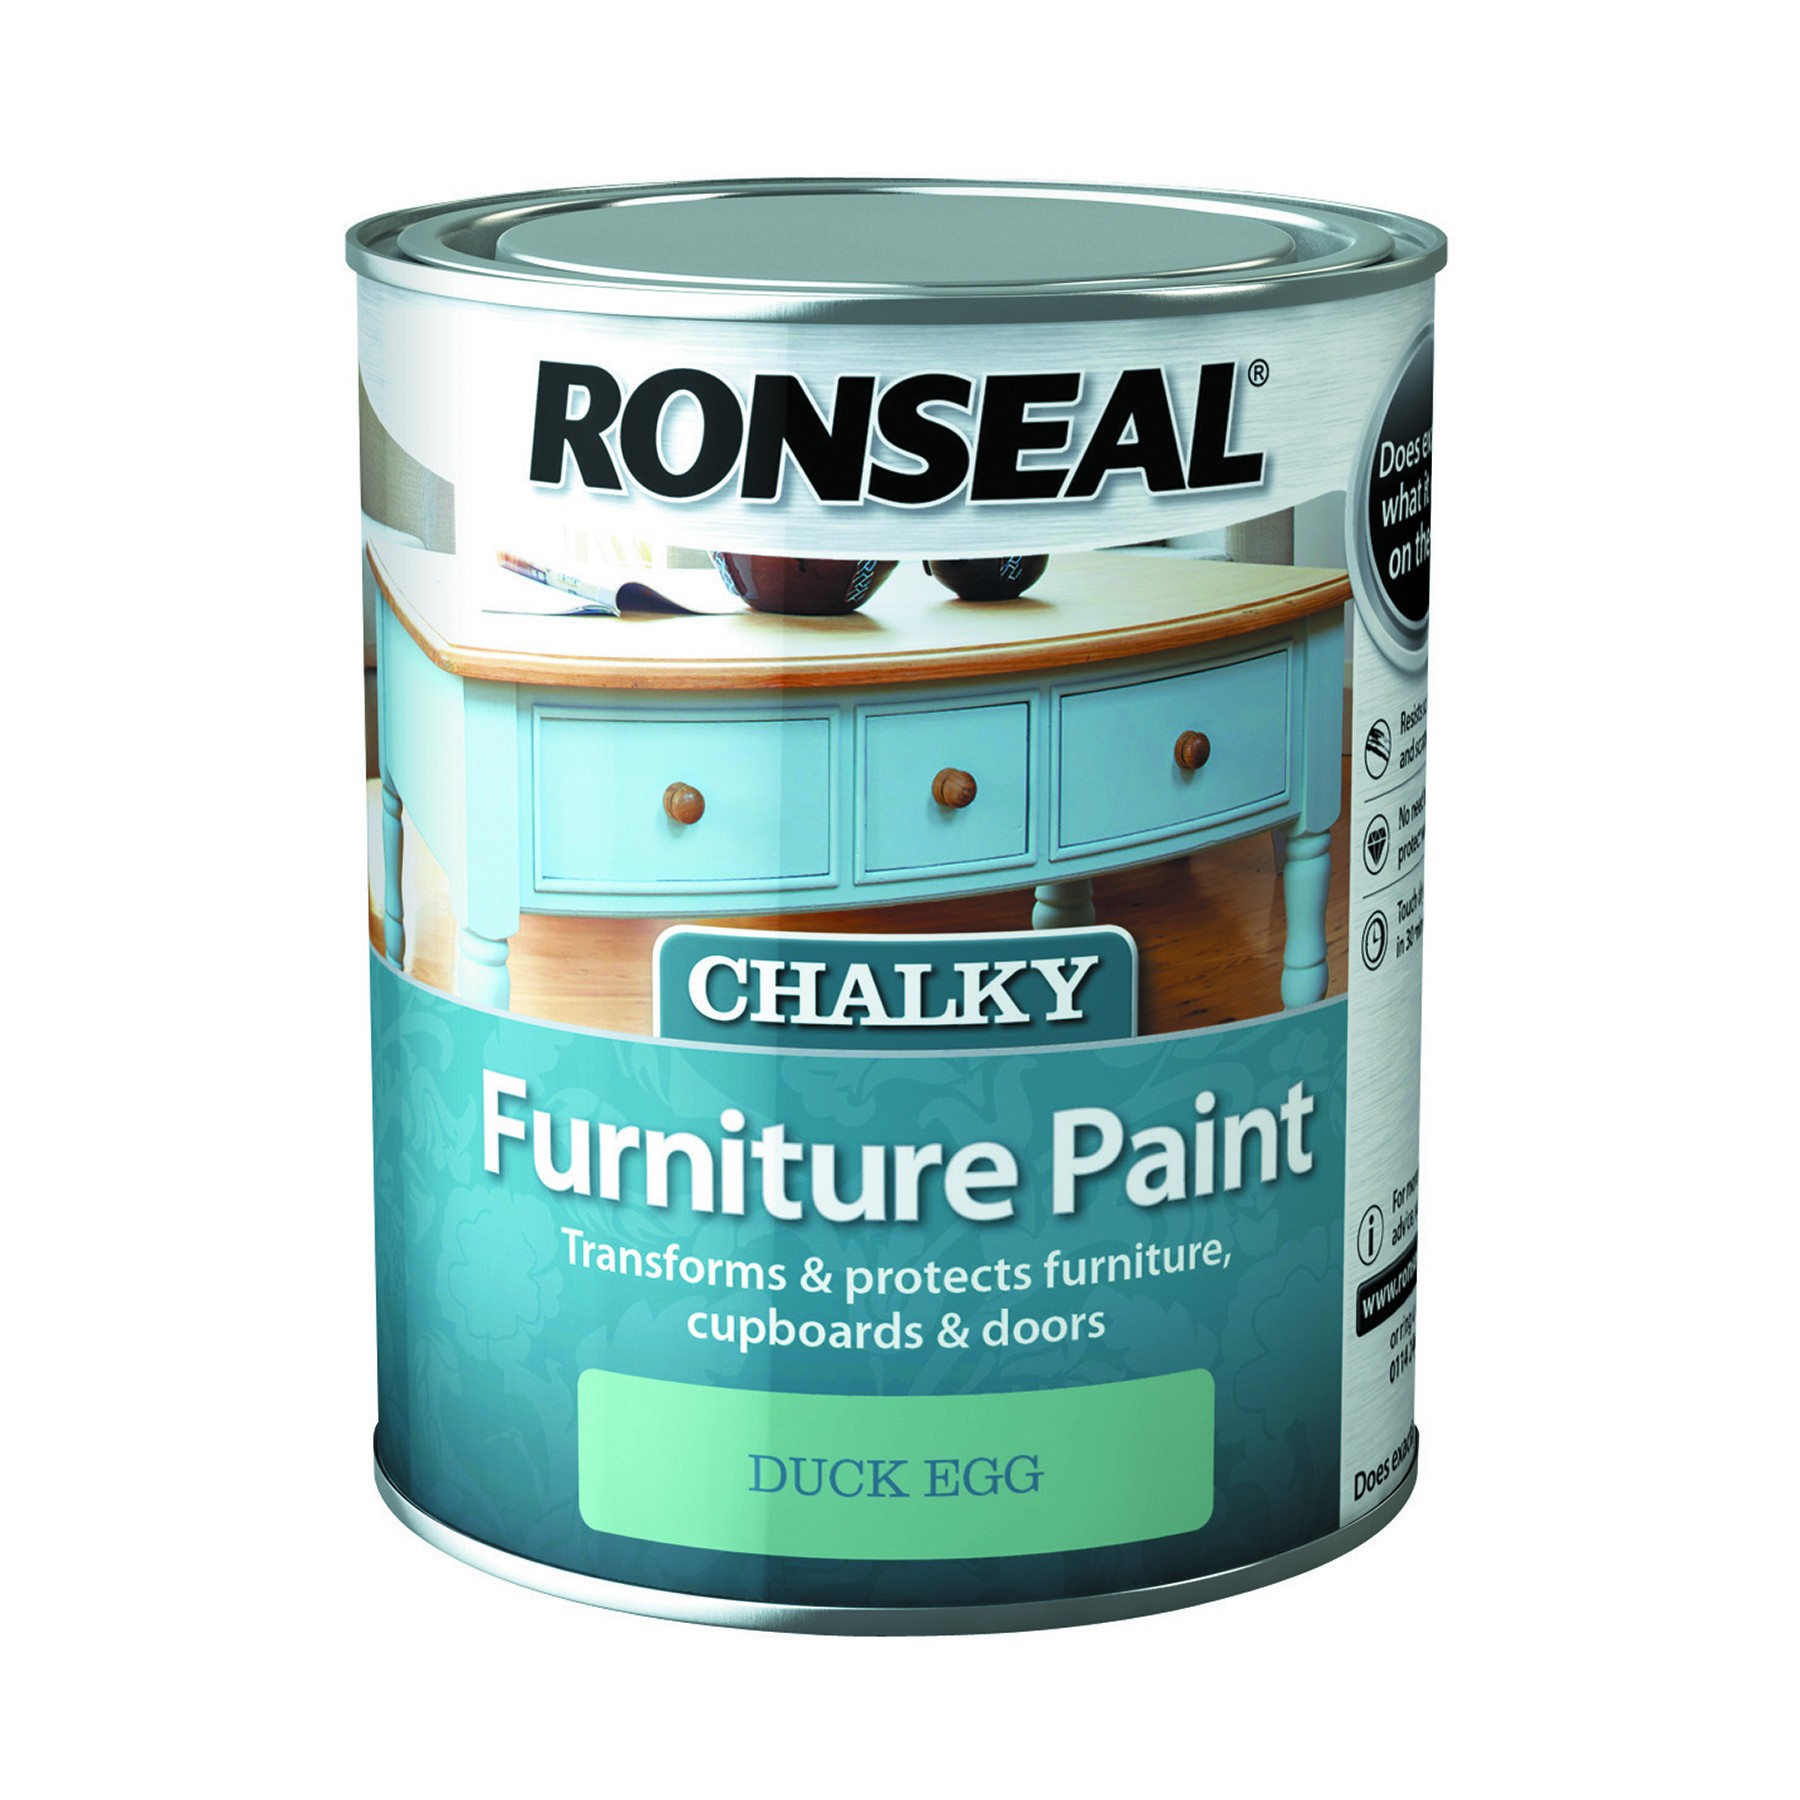 Ronseal Chalky Furniture Paint 750ml English Rose [RGS37484]